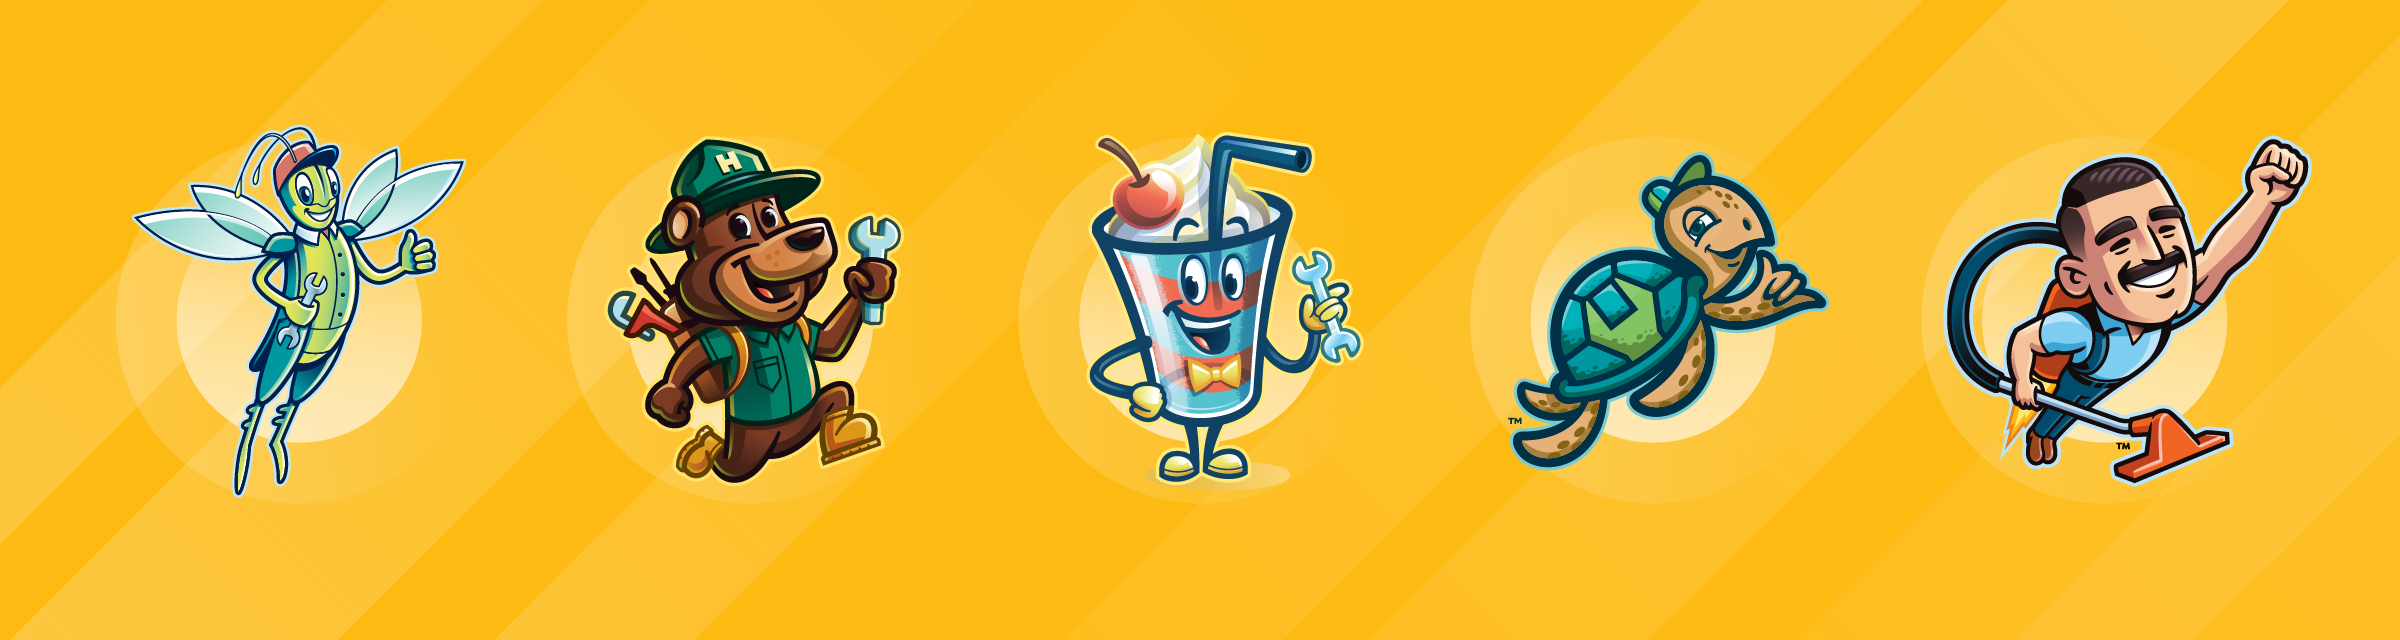 Can You Name These Fast Food Chain Logos and Mascots?